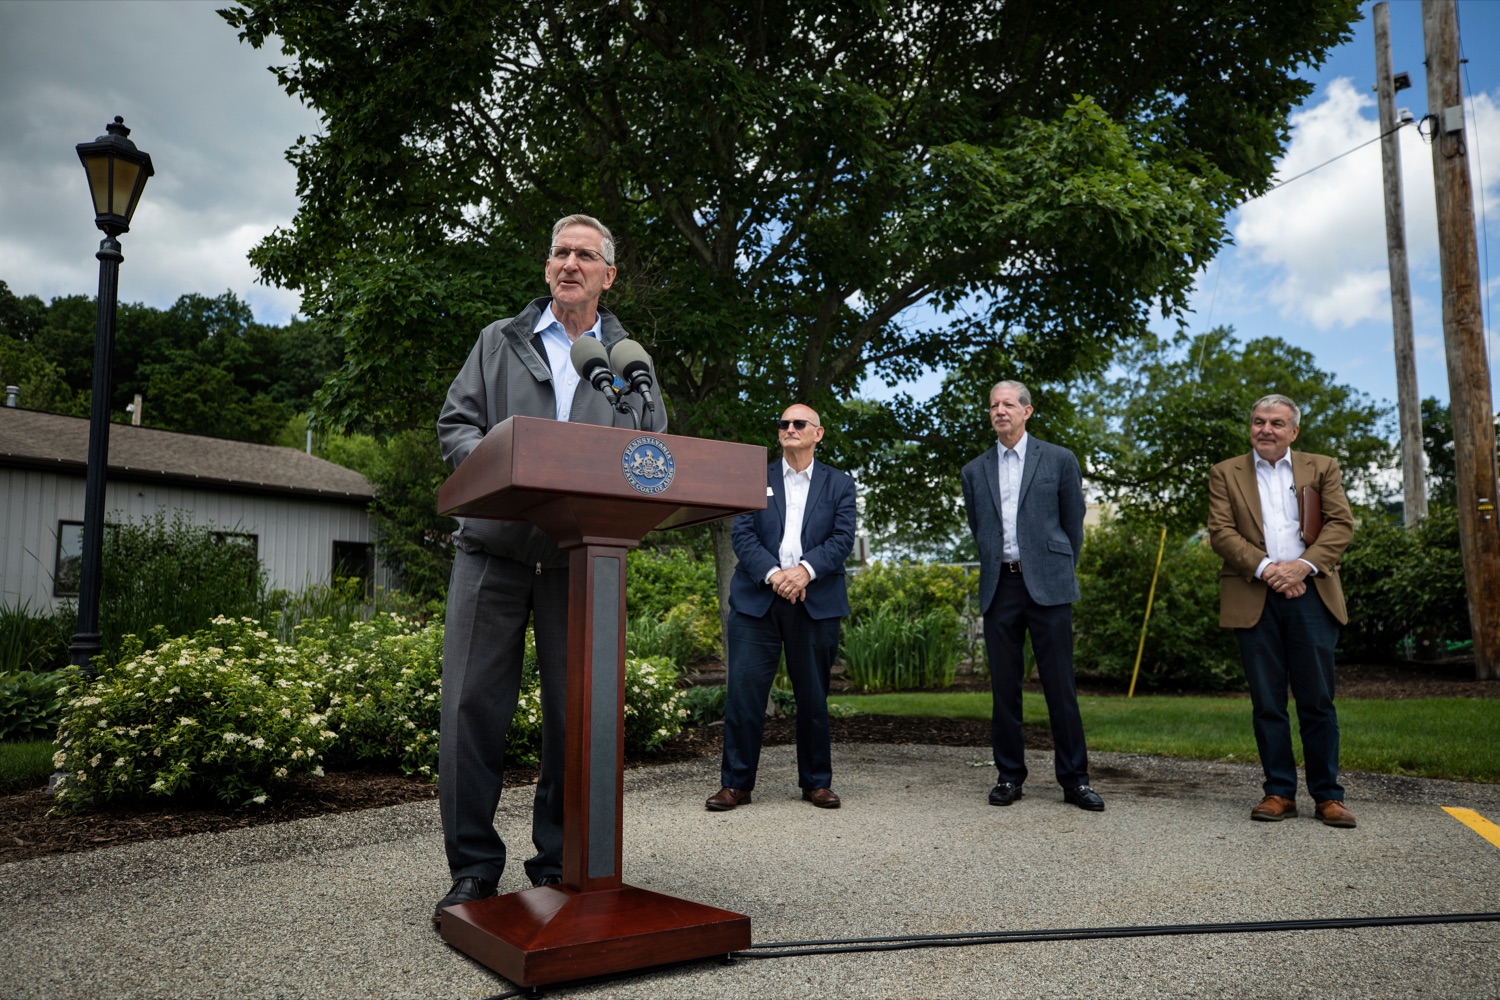 Dept. of Agriculture Secretary Russell Redding speaks during a press conference, which provided an update on the state of spotted lanternfly in Pennsylvania and the path to beating this invasive specie, at Eichenlaub Inc. in Allegheny County, on Tuesday, June 22, 2021.<br><a href="https://filesource.amperwave.net/commonwealthofpa/photo/18842_AGRIC_SLF_NK_002.jpg" target="_blank">⇣ Download Photo</a>